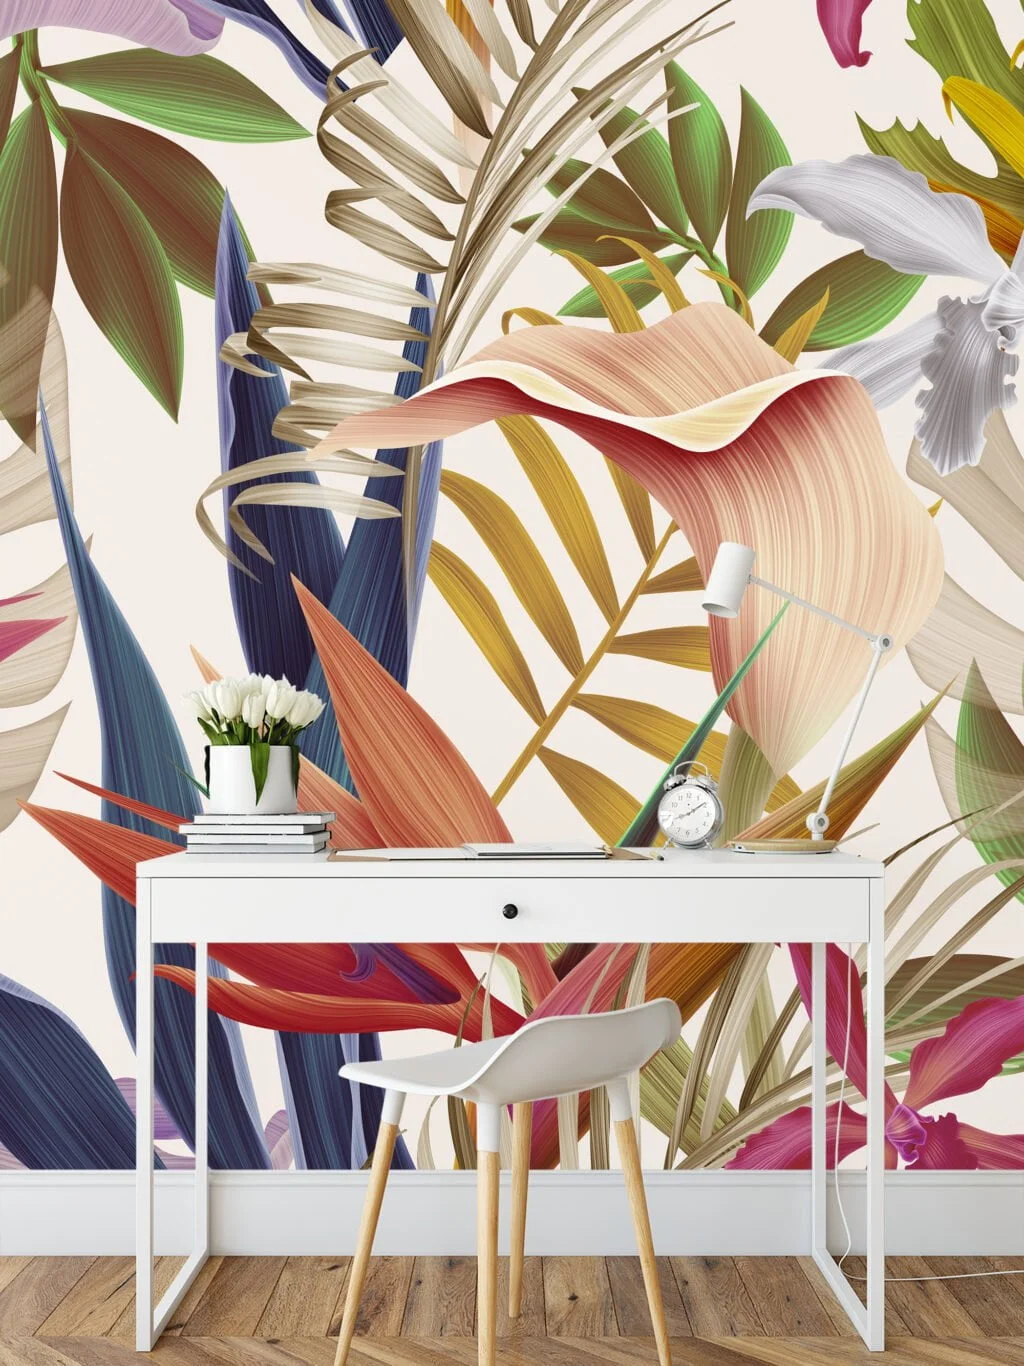 Colorful Tropical Flowers With Birds Of Paradise Wallpaper, Contemporary Nature Inspired Peel & Stick Wall Mural